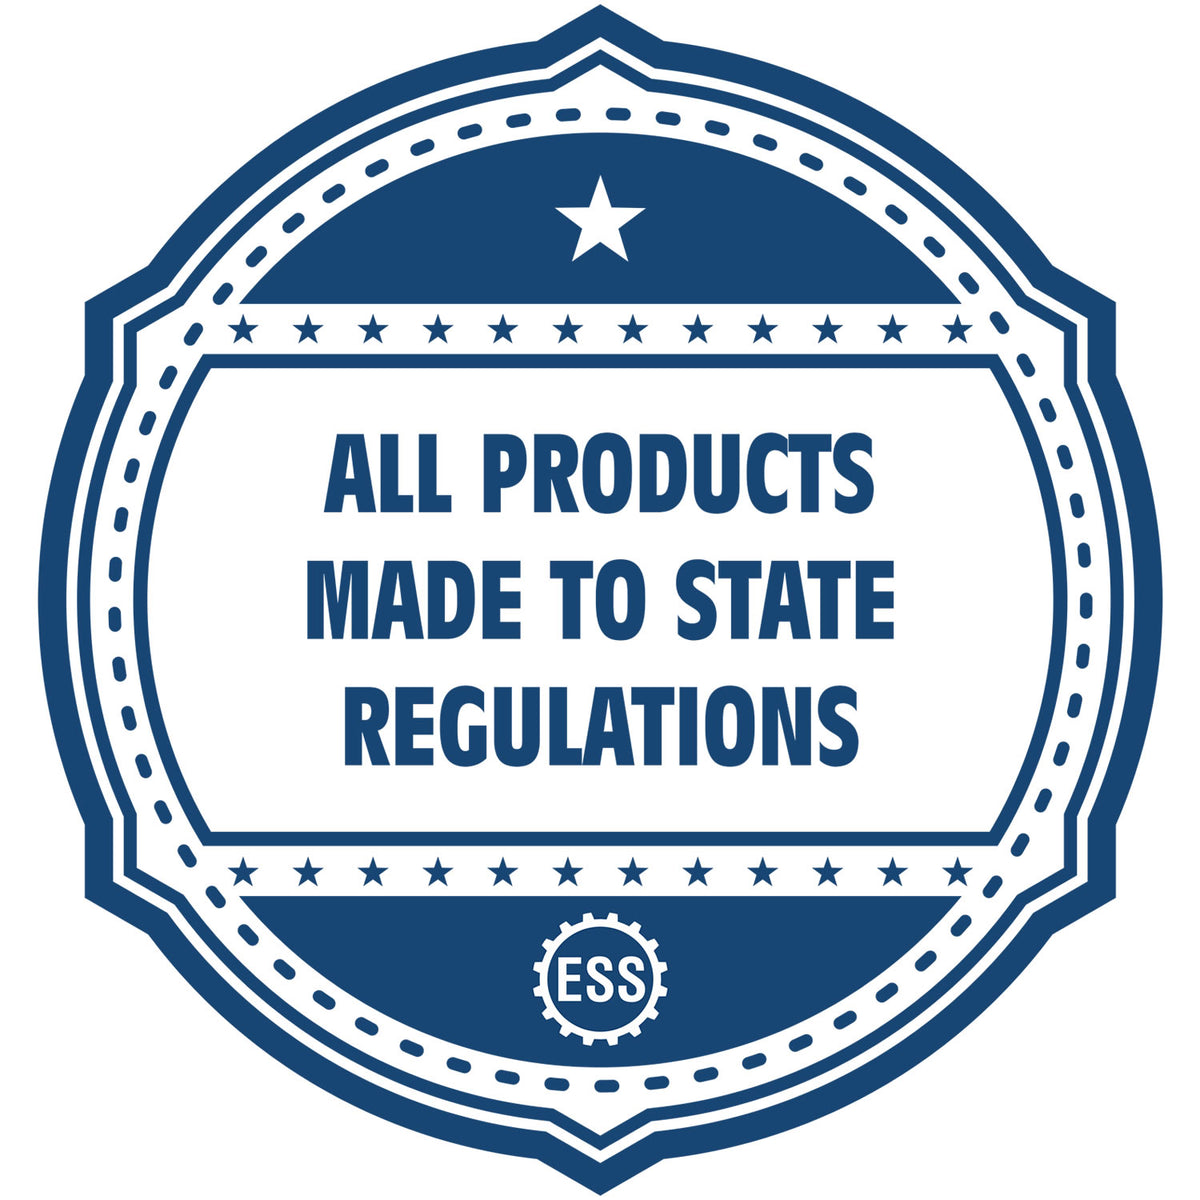 An icon or badge element for the Slim Pre-Inked New Hampshire Professional Engineer Seal Stamp showing that this product is made in compliance with state regulations.